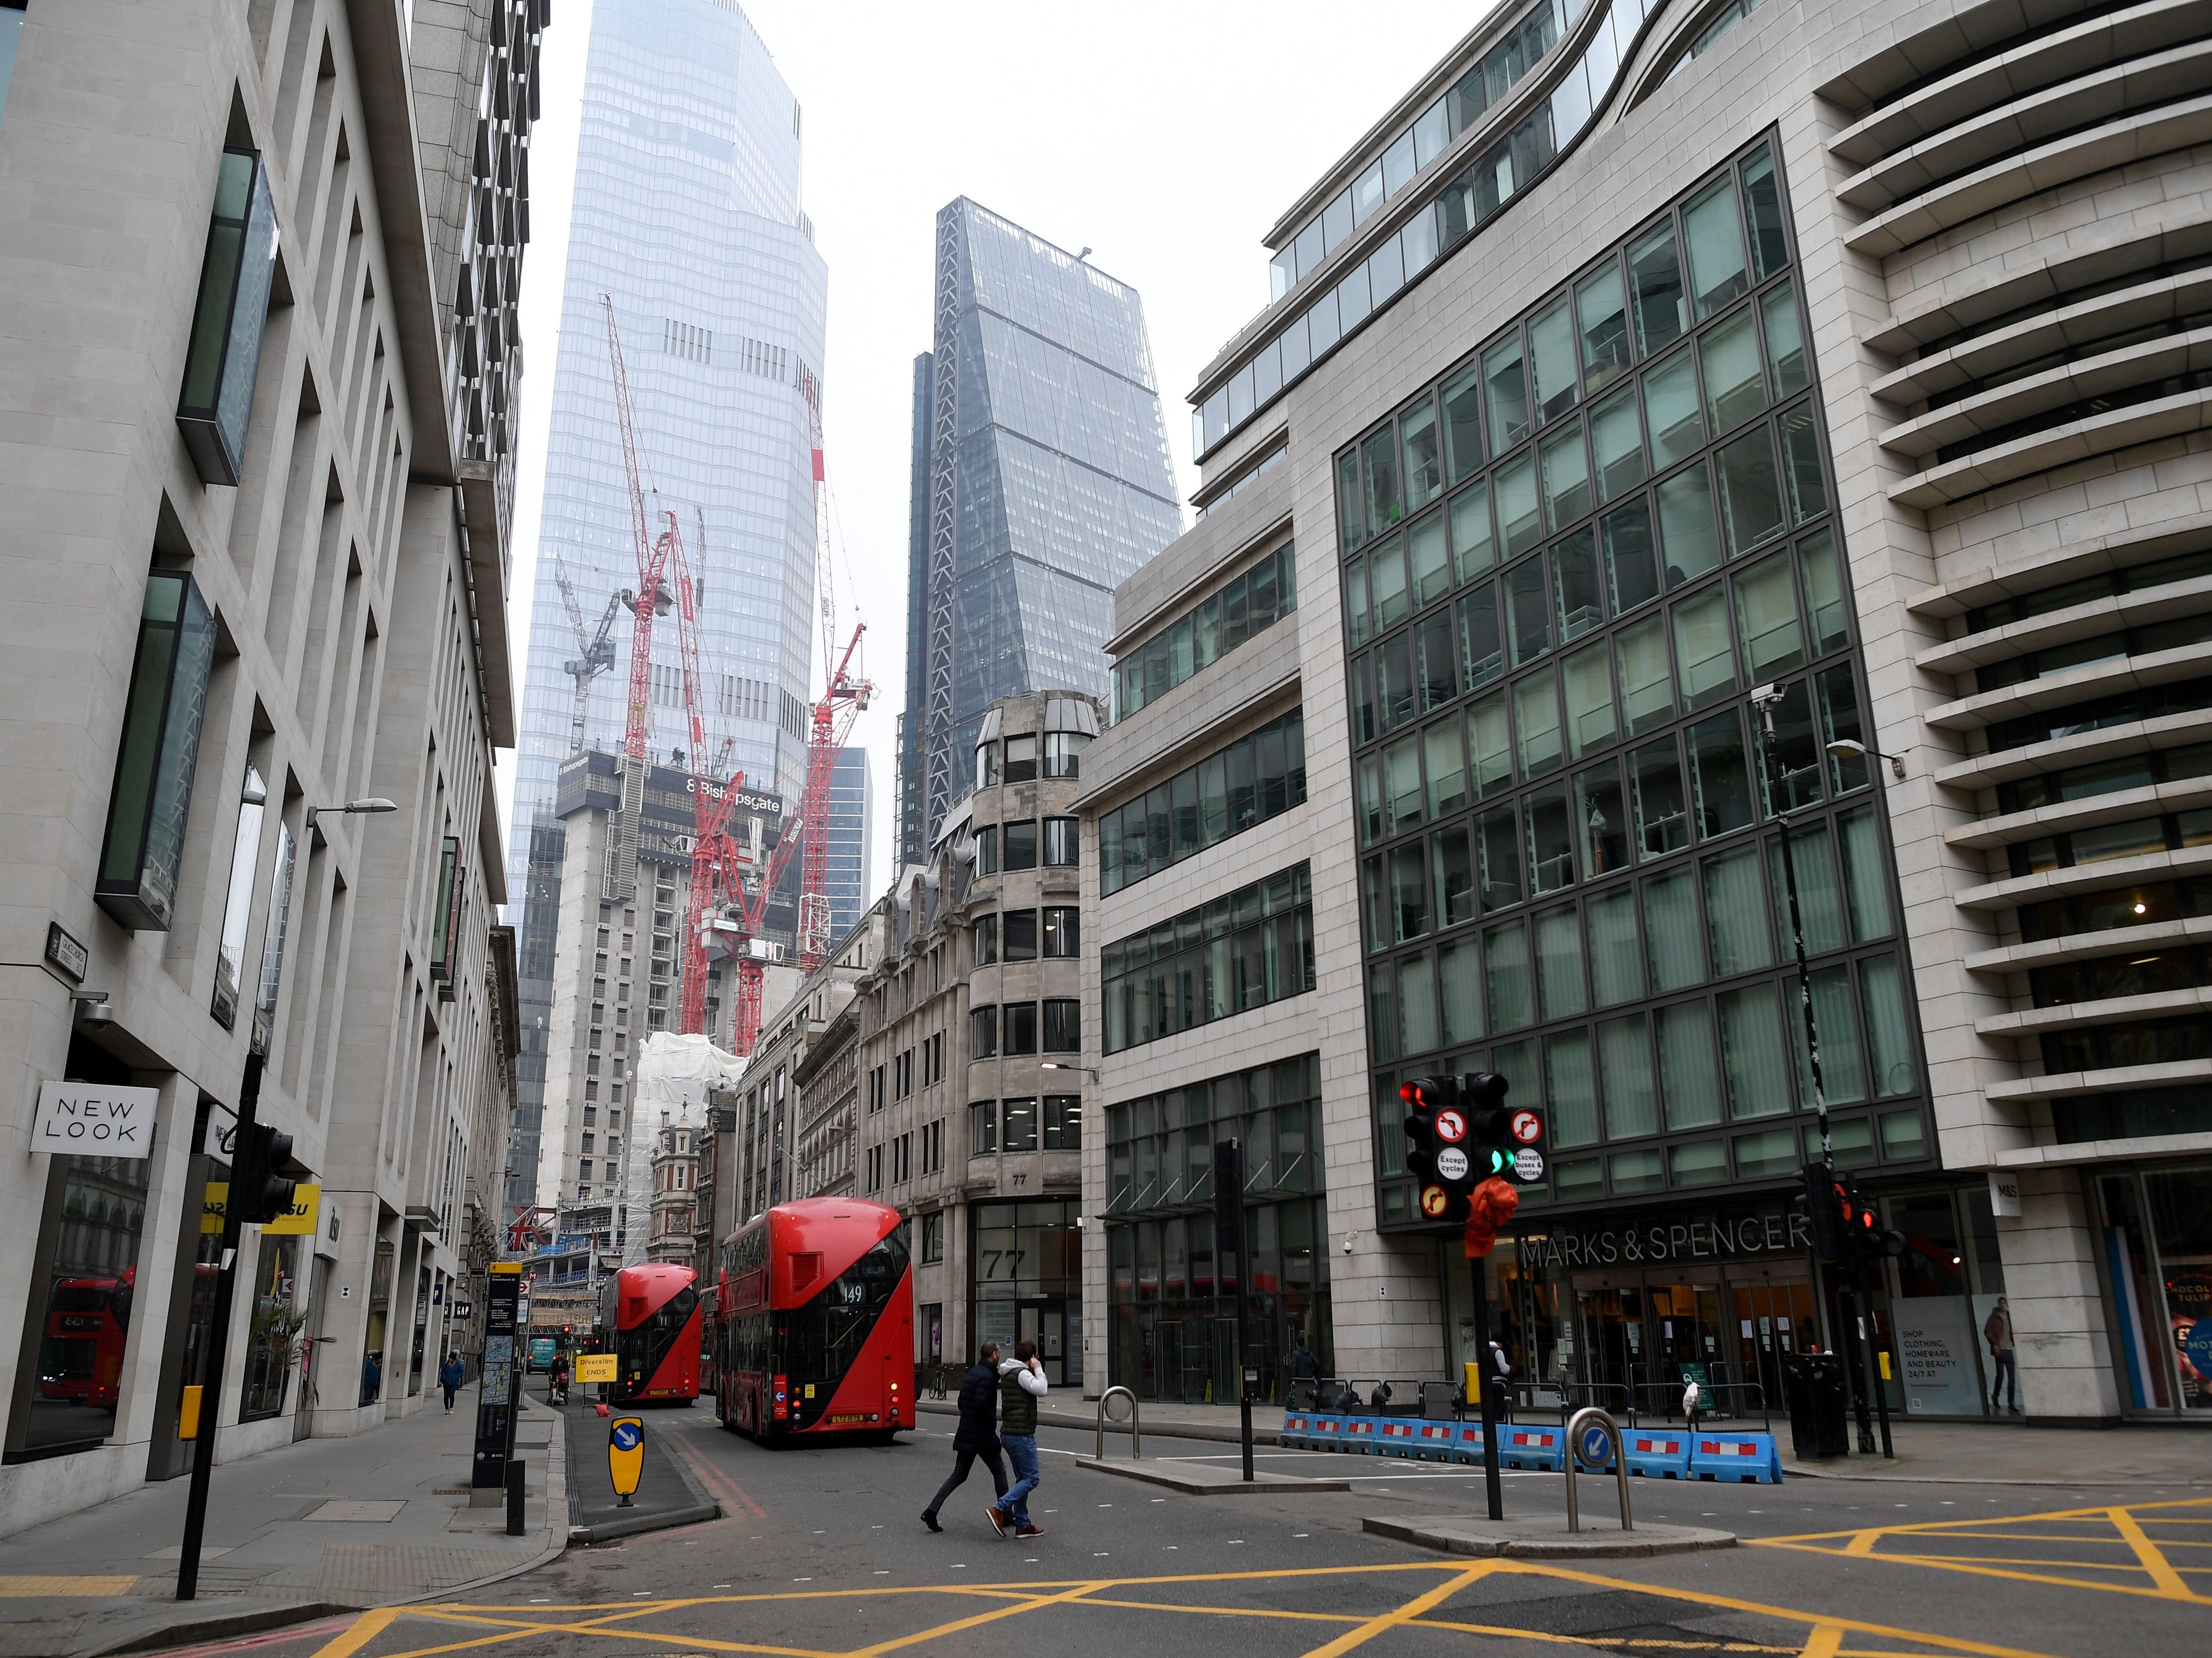 Pedestrians cross a near-deserted street in the City of London as the majority of offices remain closed